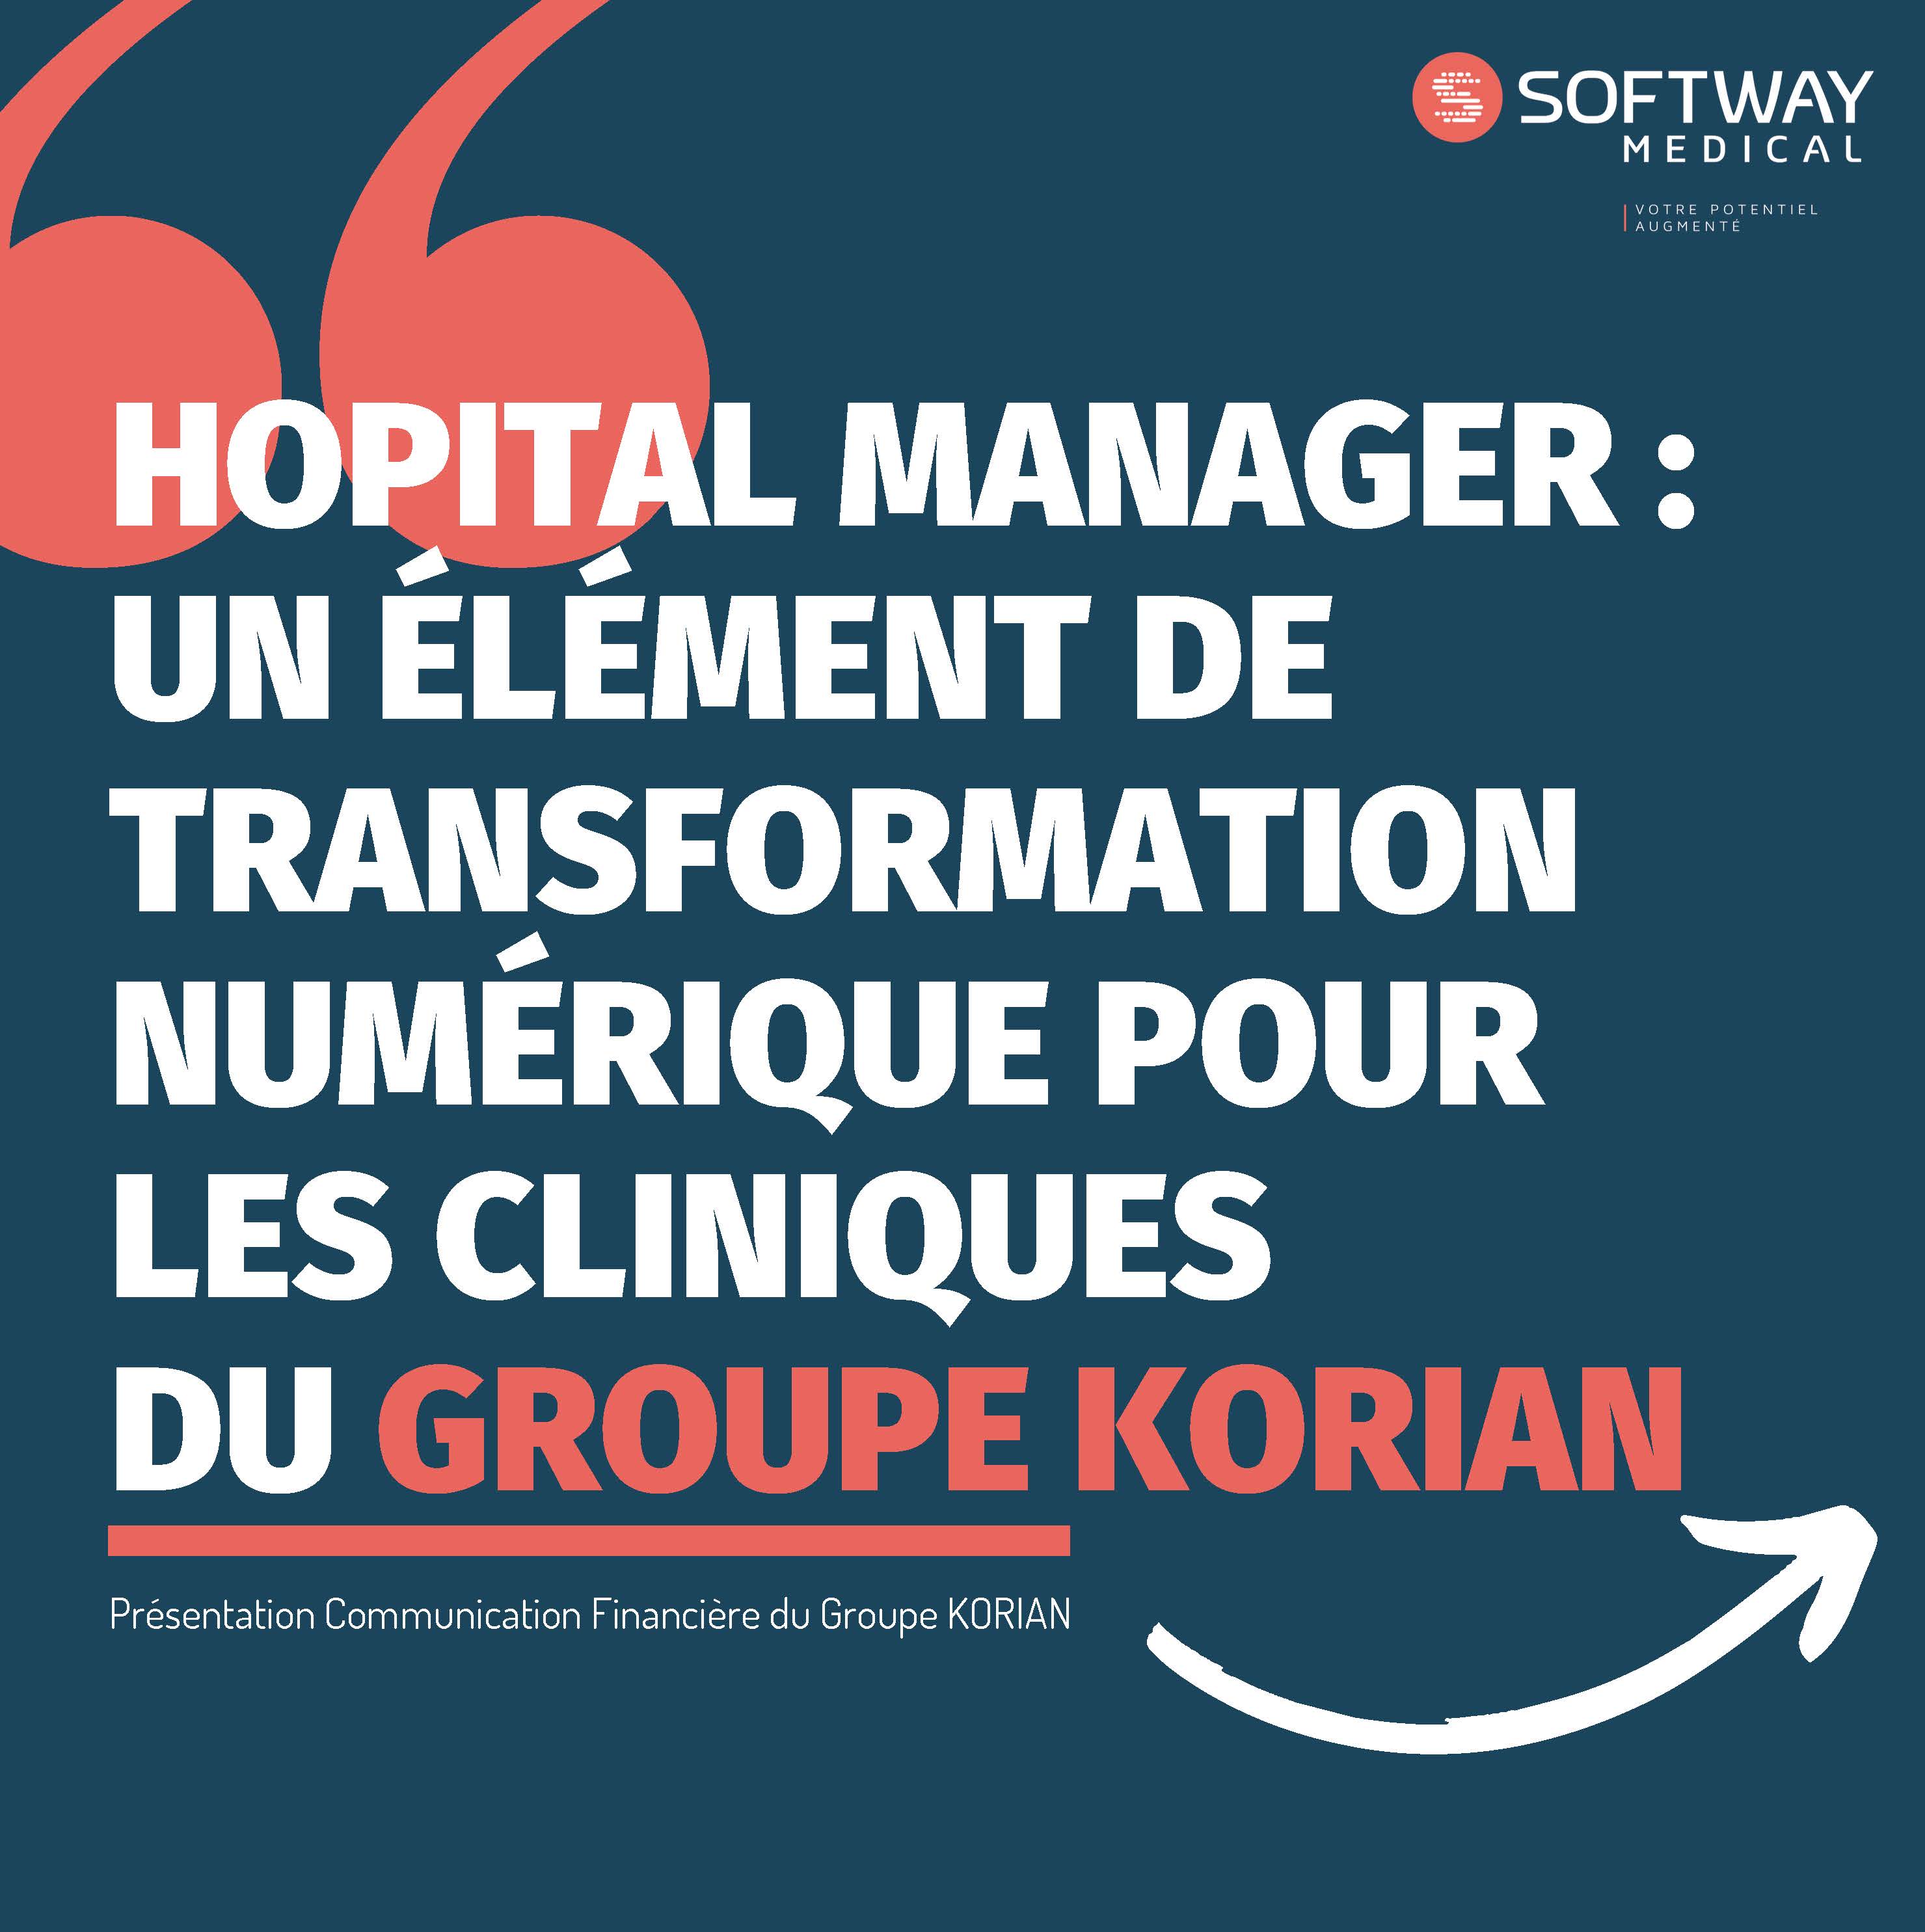 « HOSPITAL MANAGER, the new state of the art tool for Korian Clinics » : Capital Markets Day 2019 by Korian